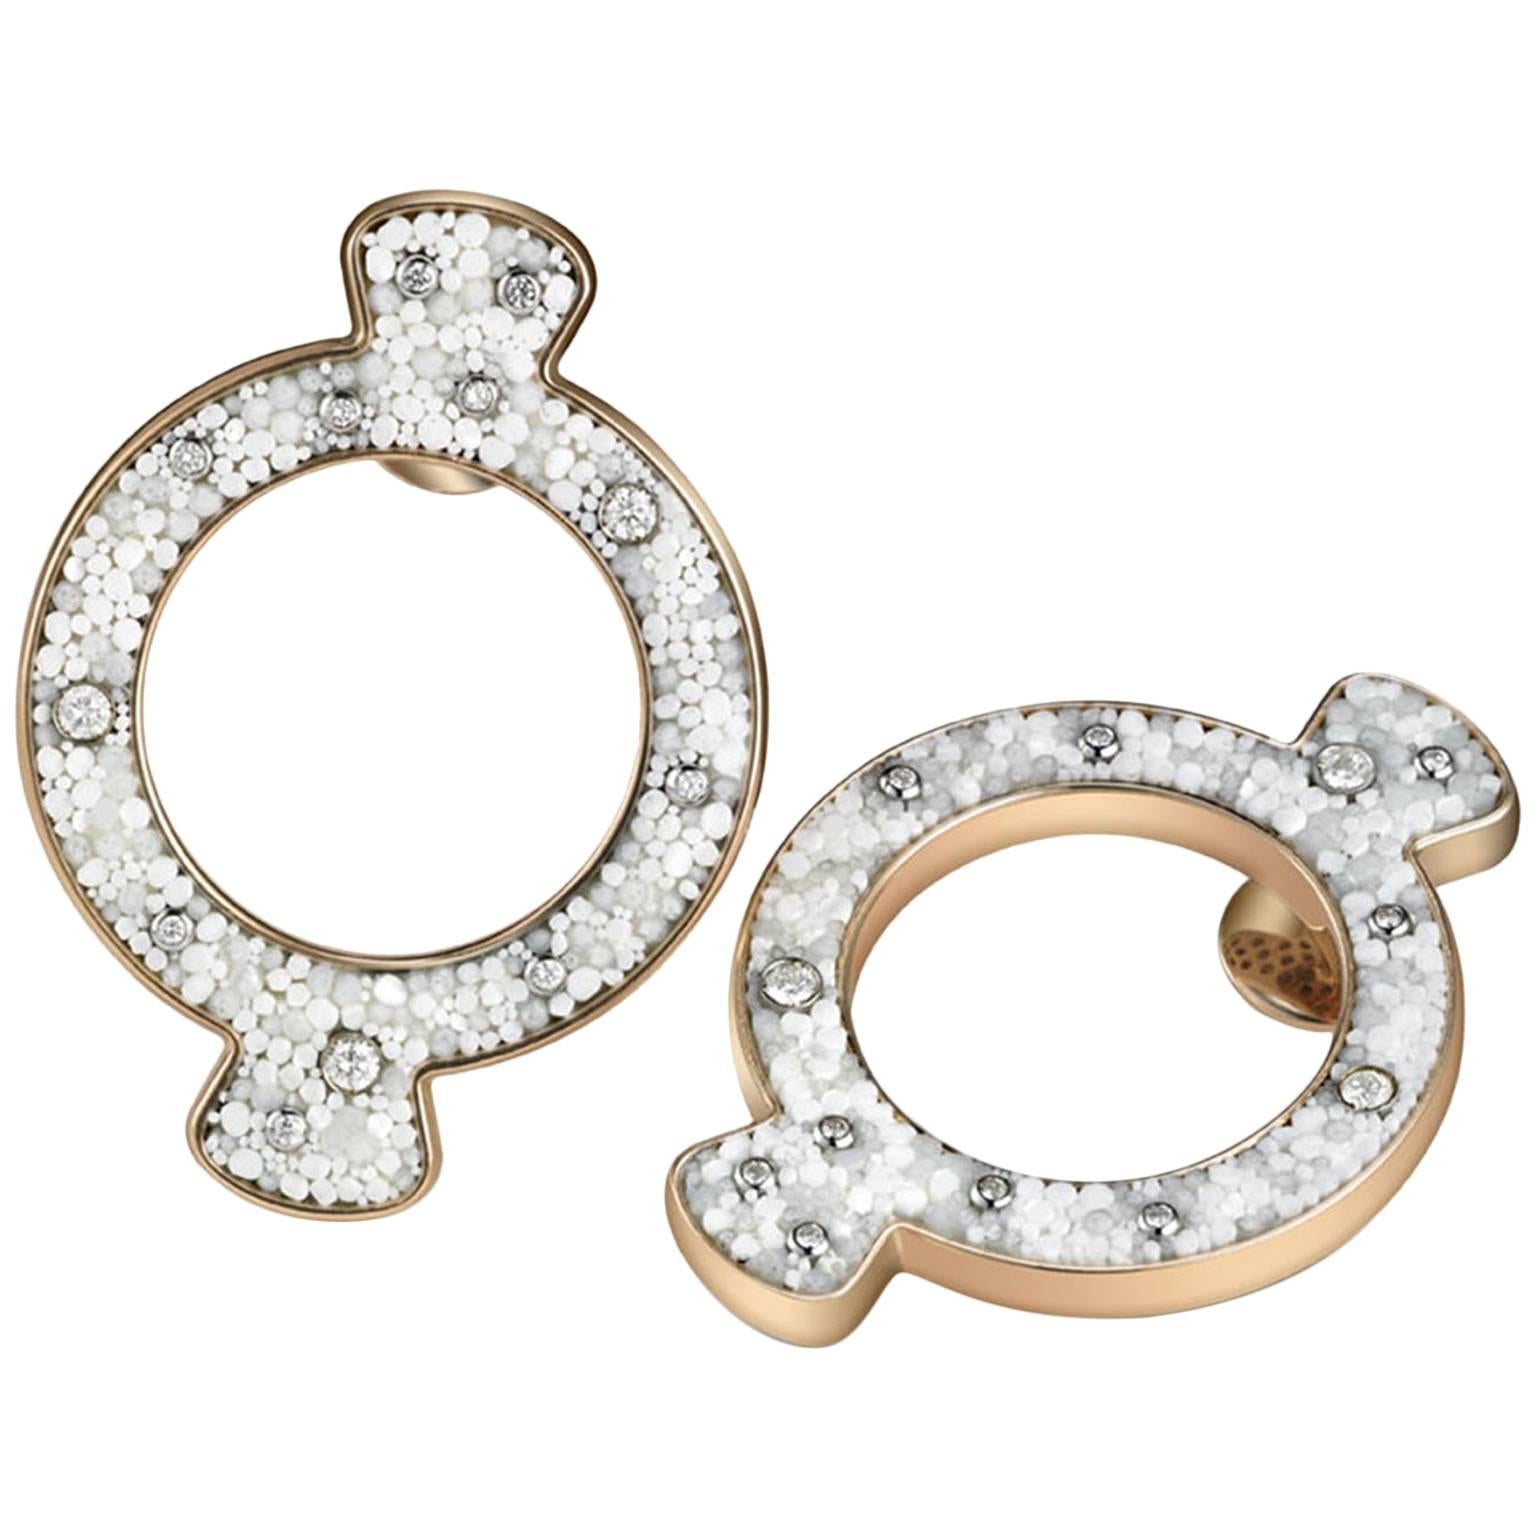 Stylish Earring Rose Gold & Silver White Diamon Hand Decorated with Micromosaic 